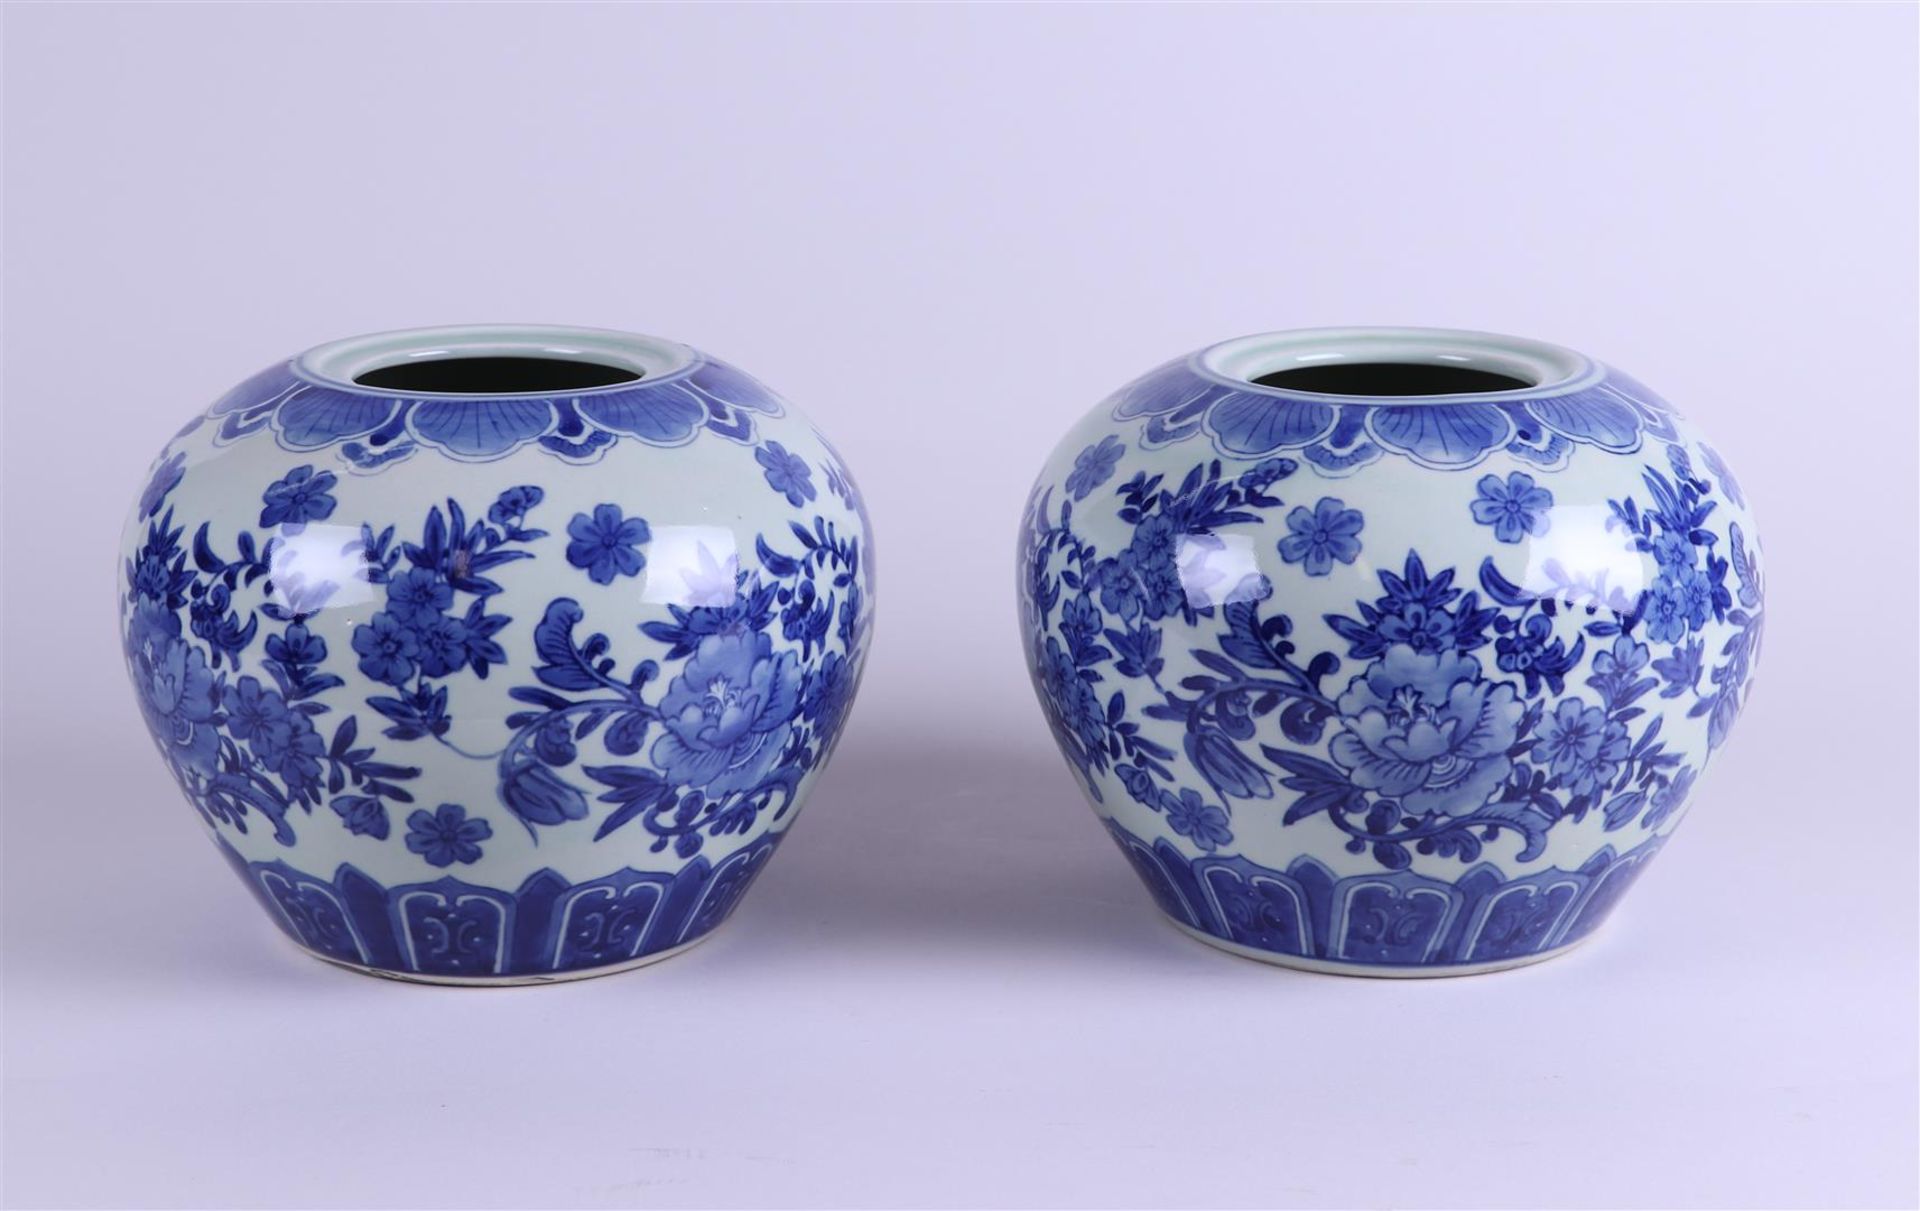 A set of (2)  porcelain storage jars. China, late 20th century. Lids not present. 